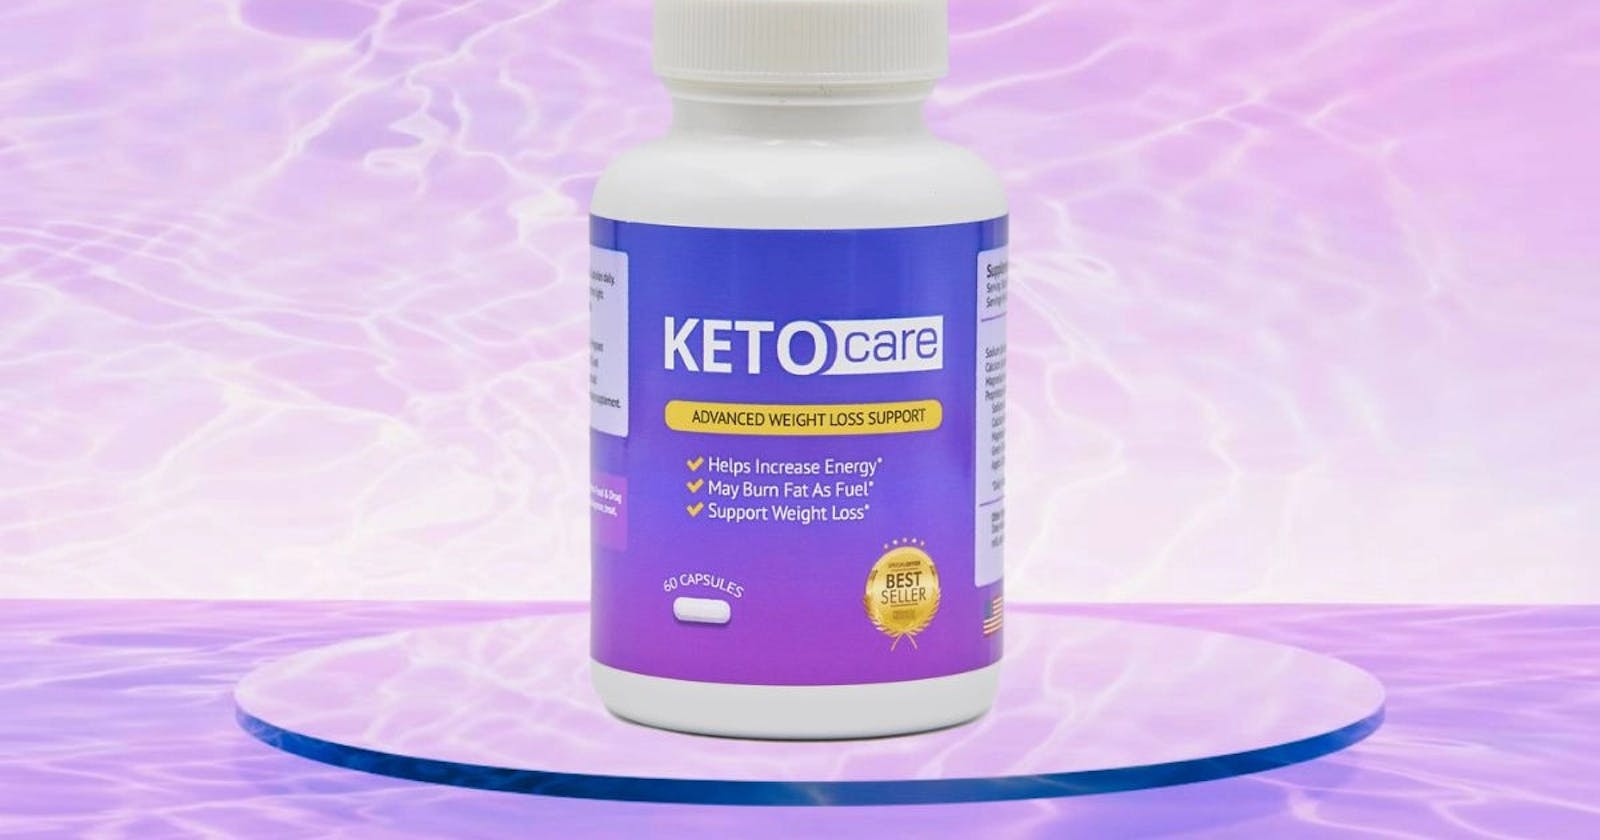 Keto Care Advanced Formula: Does It Really Work? [Updated Review]